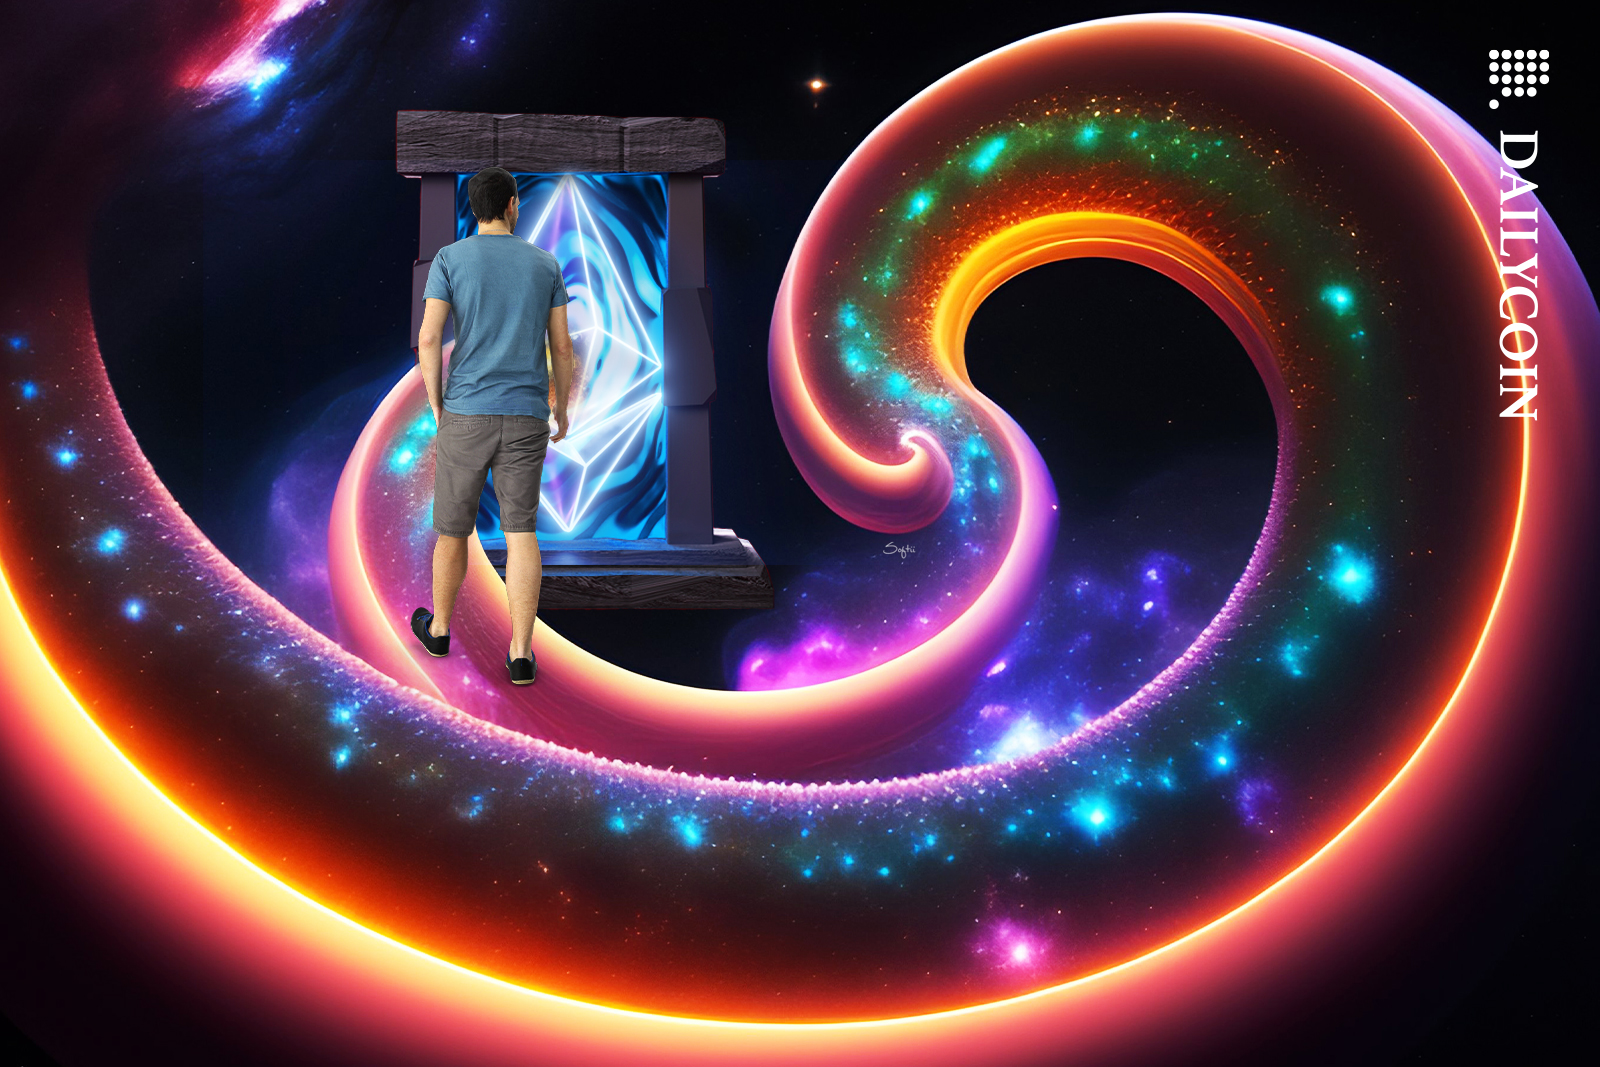 Man walking on a glowing cosmos spiral towards a door with shining Ethereum logo.